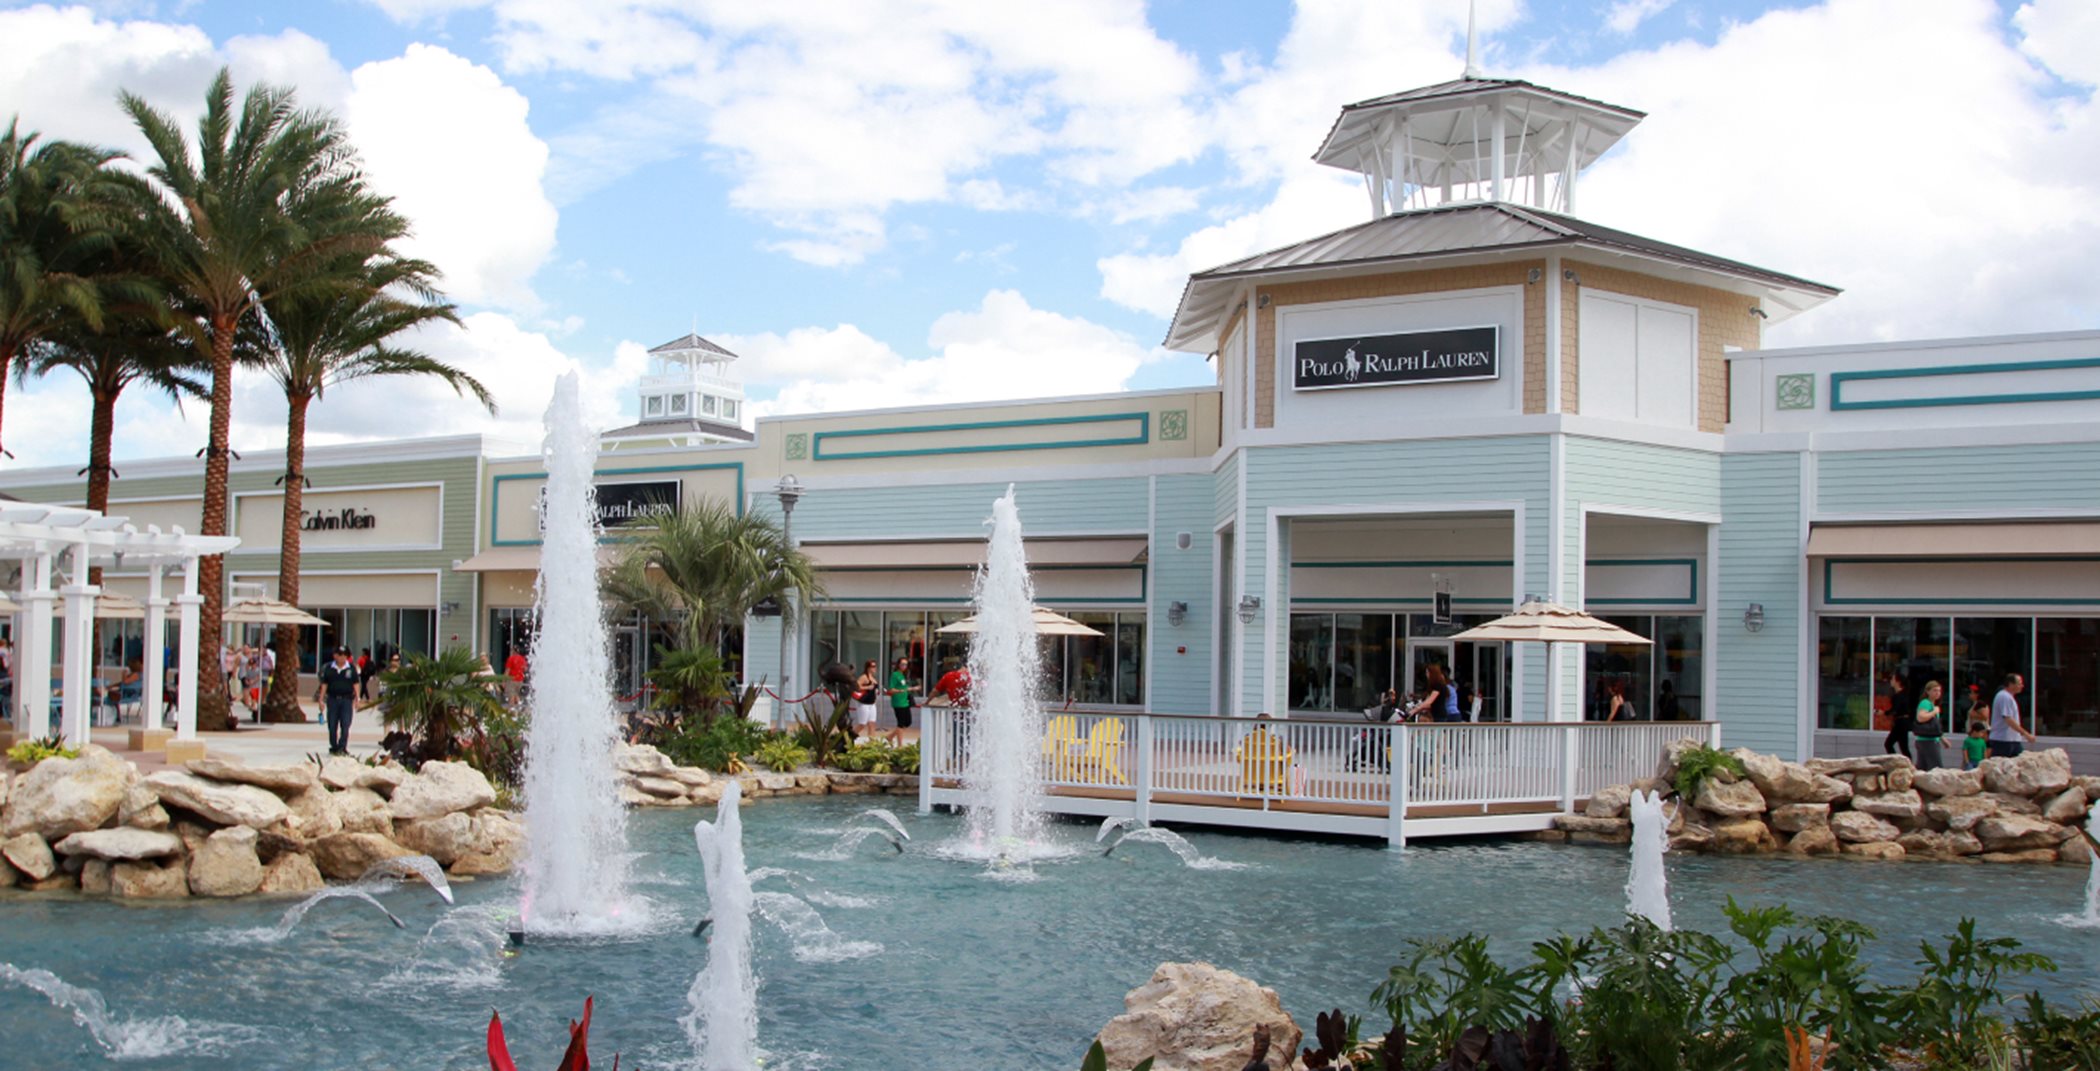 Tampa Outlets